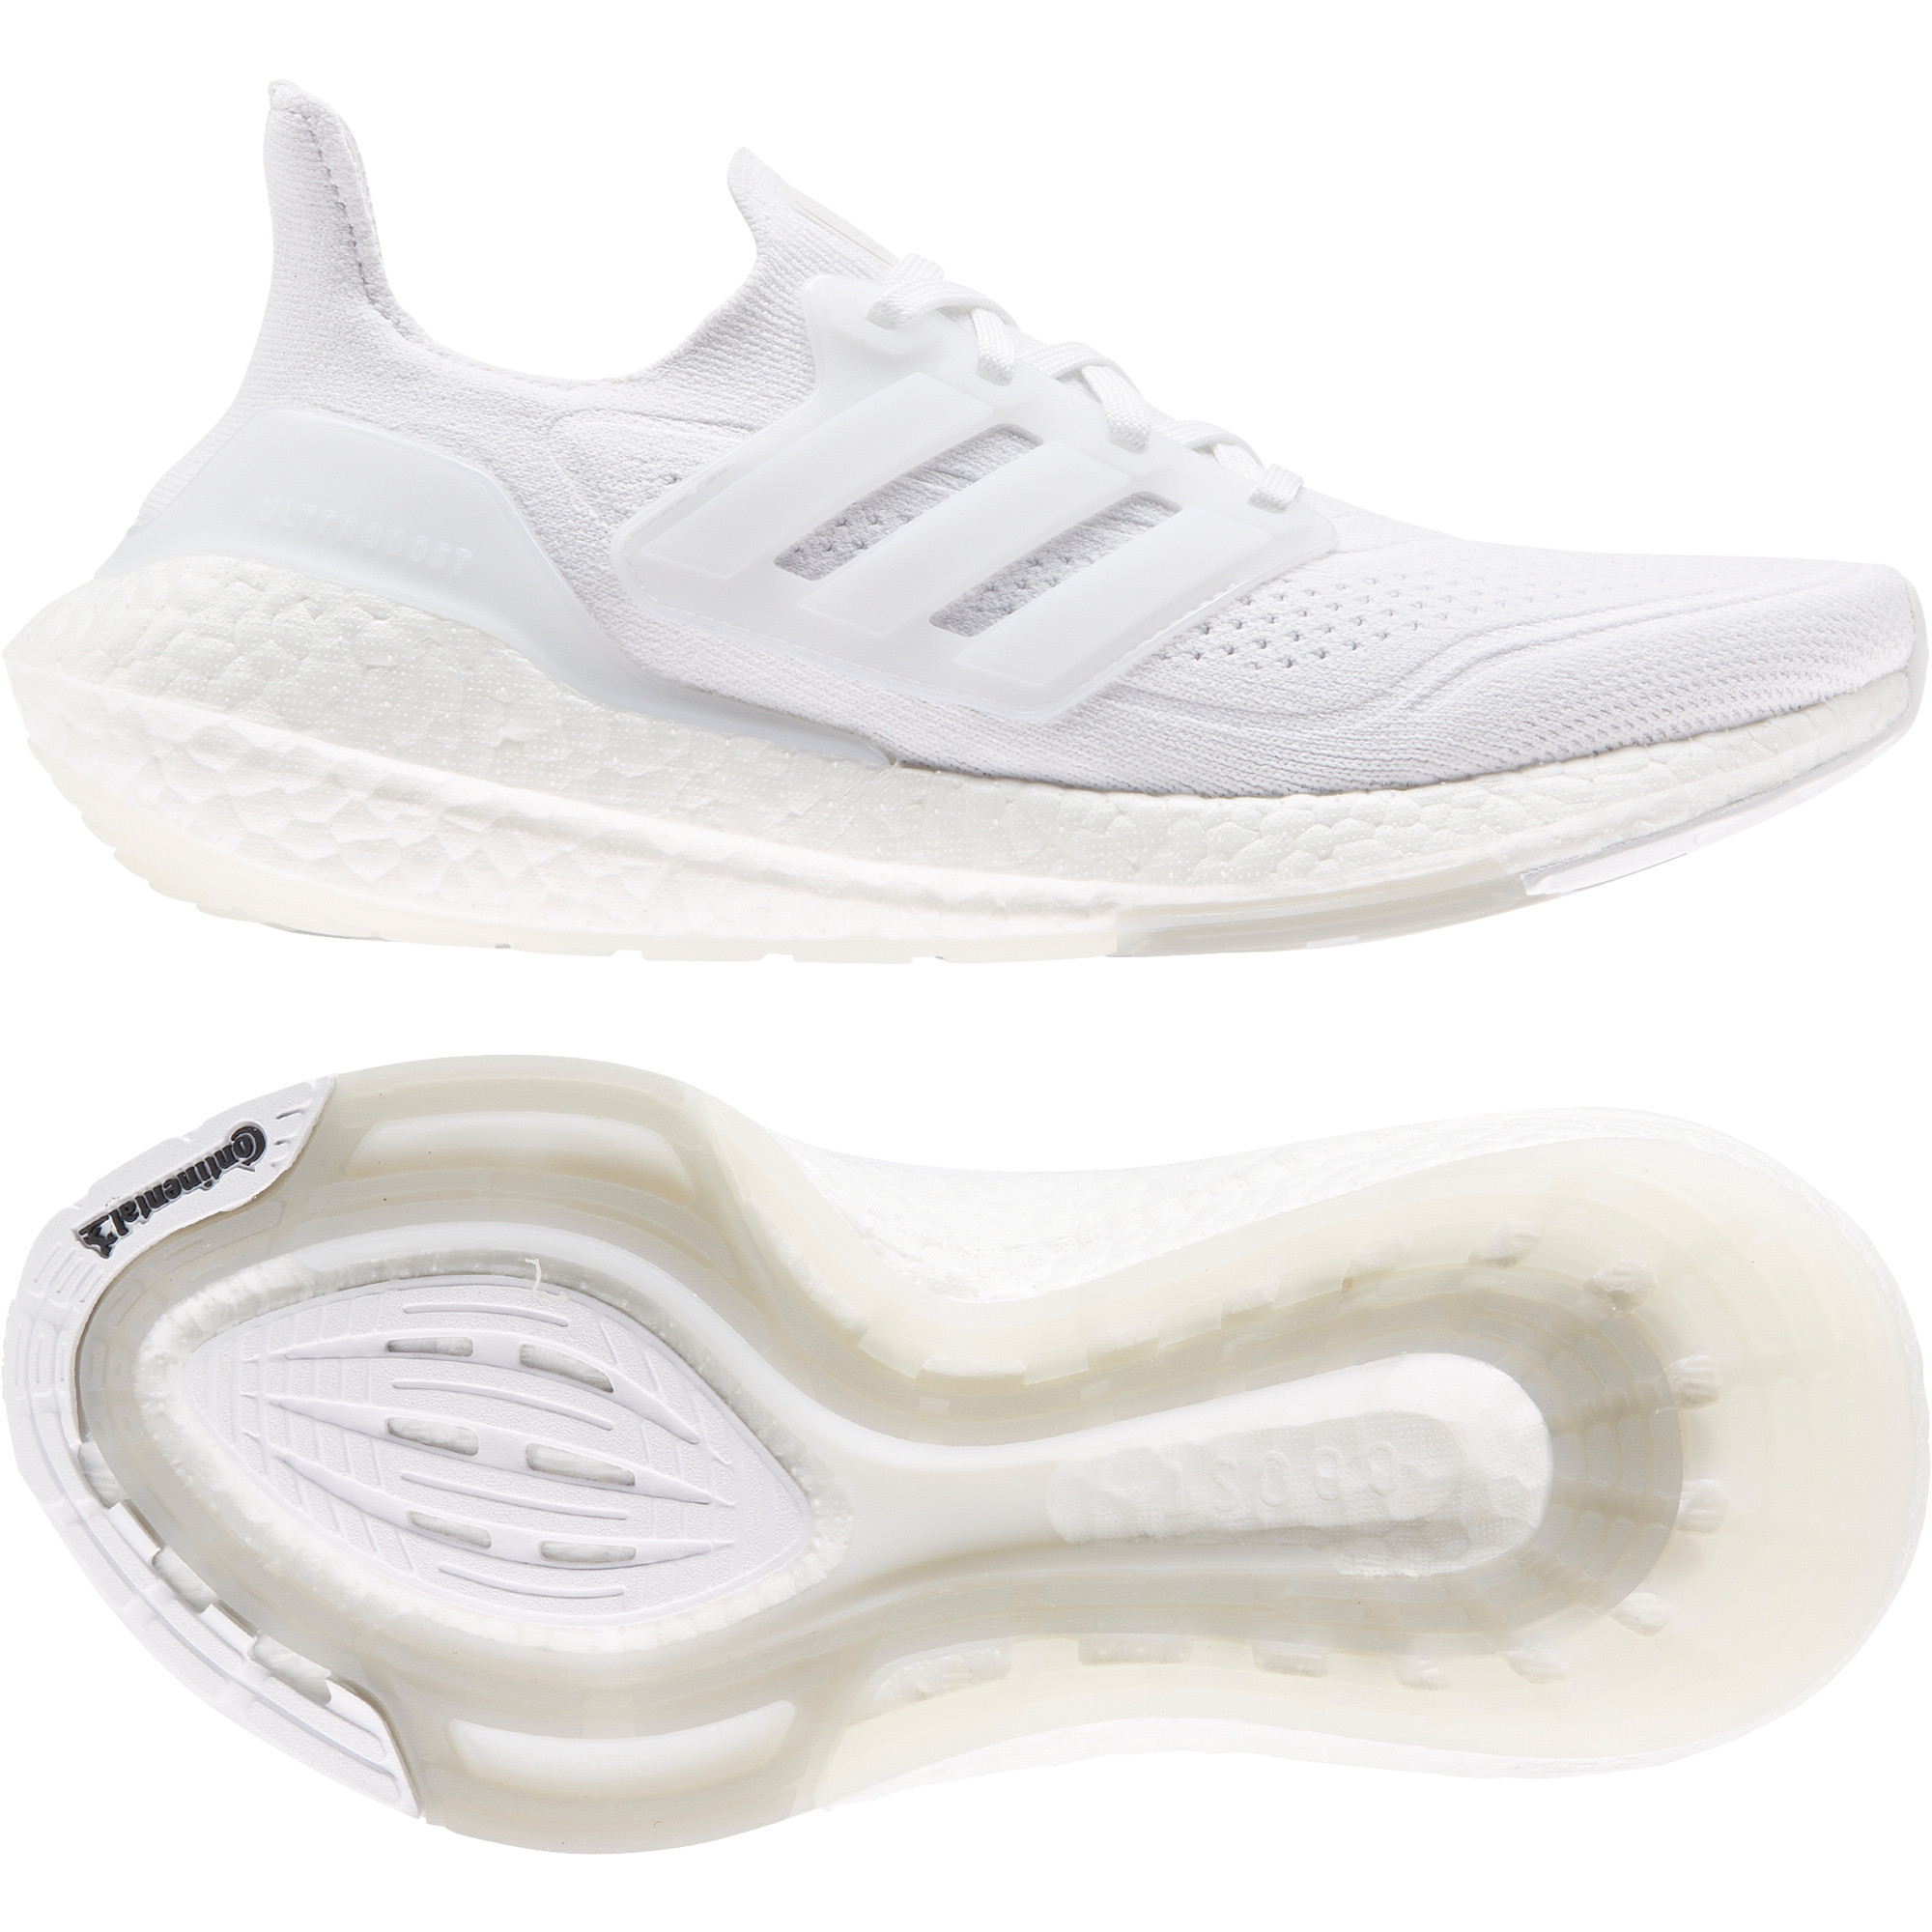 Ultraboost 21 Shoes, White, large image number 8